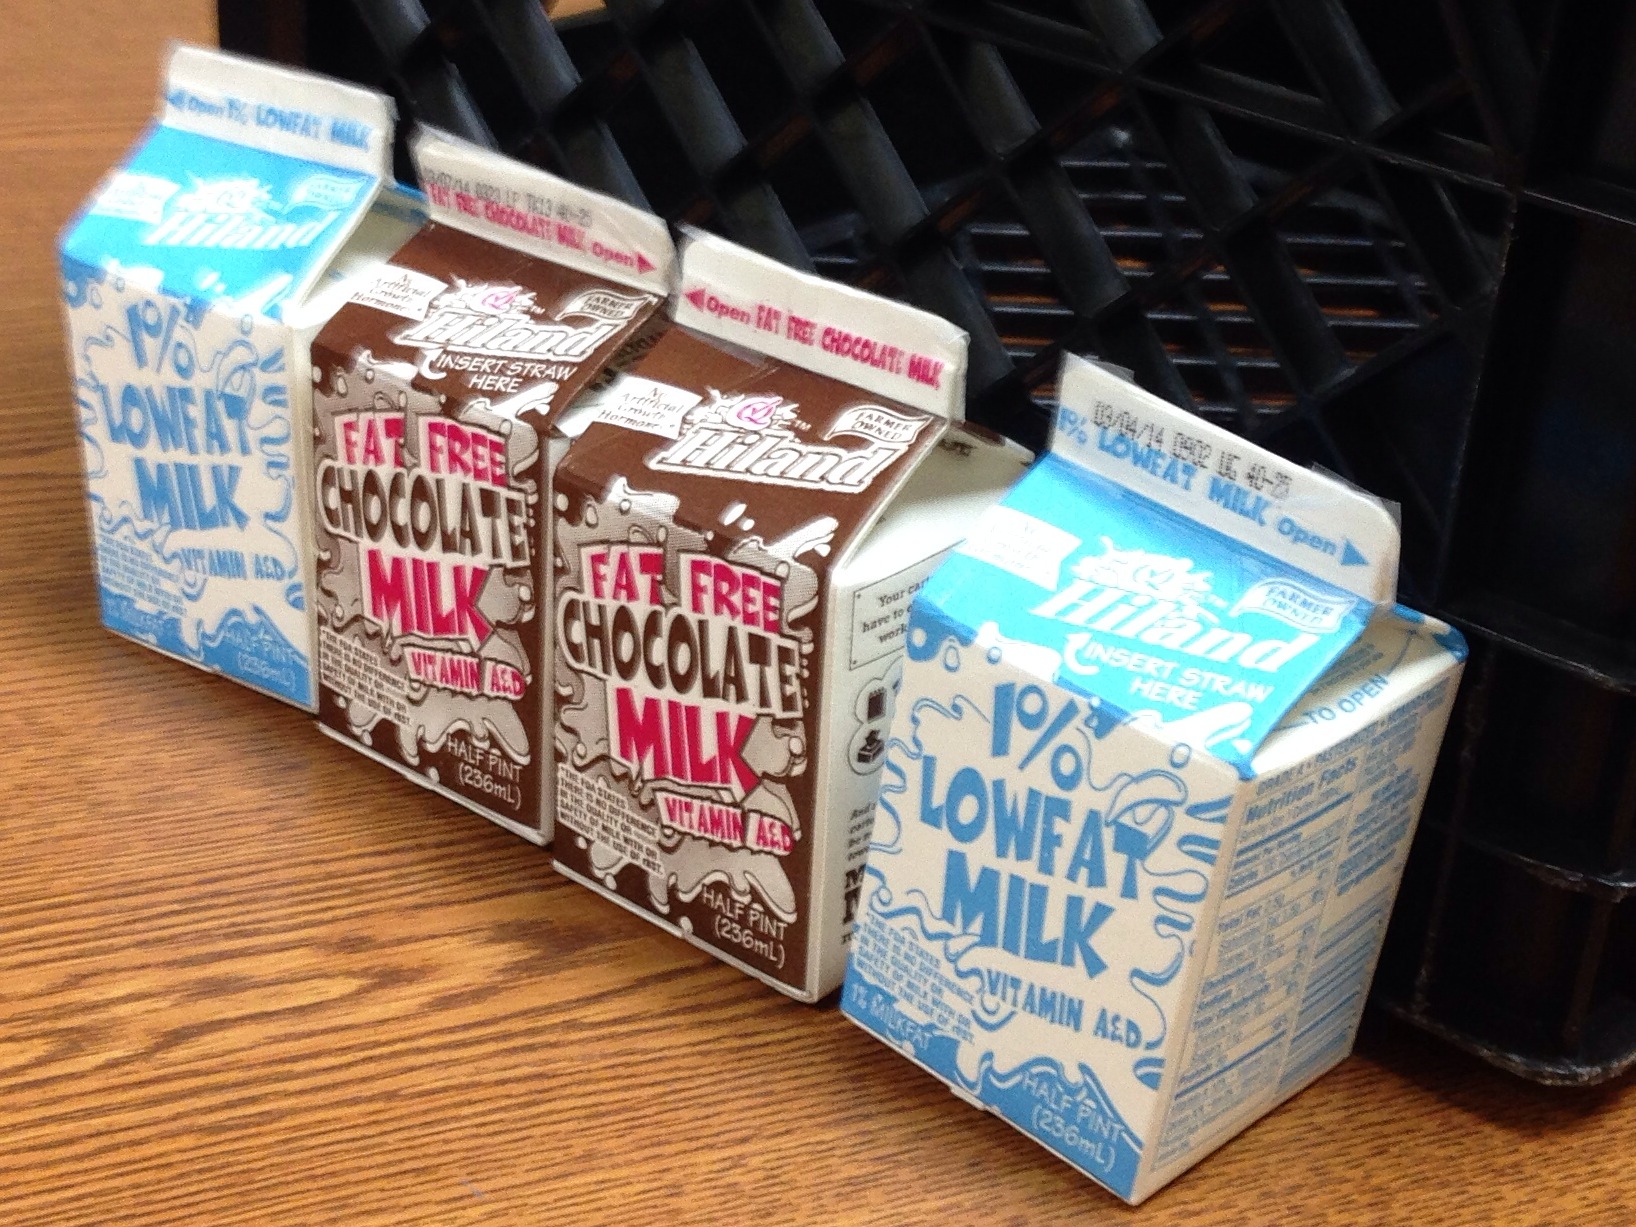 An elementary student admits to stealing a milk carton 56 yea